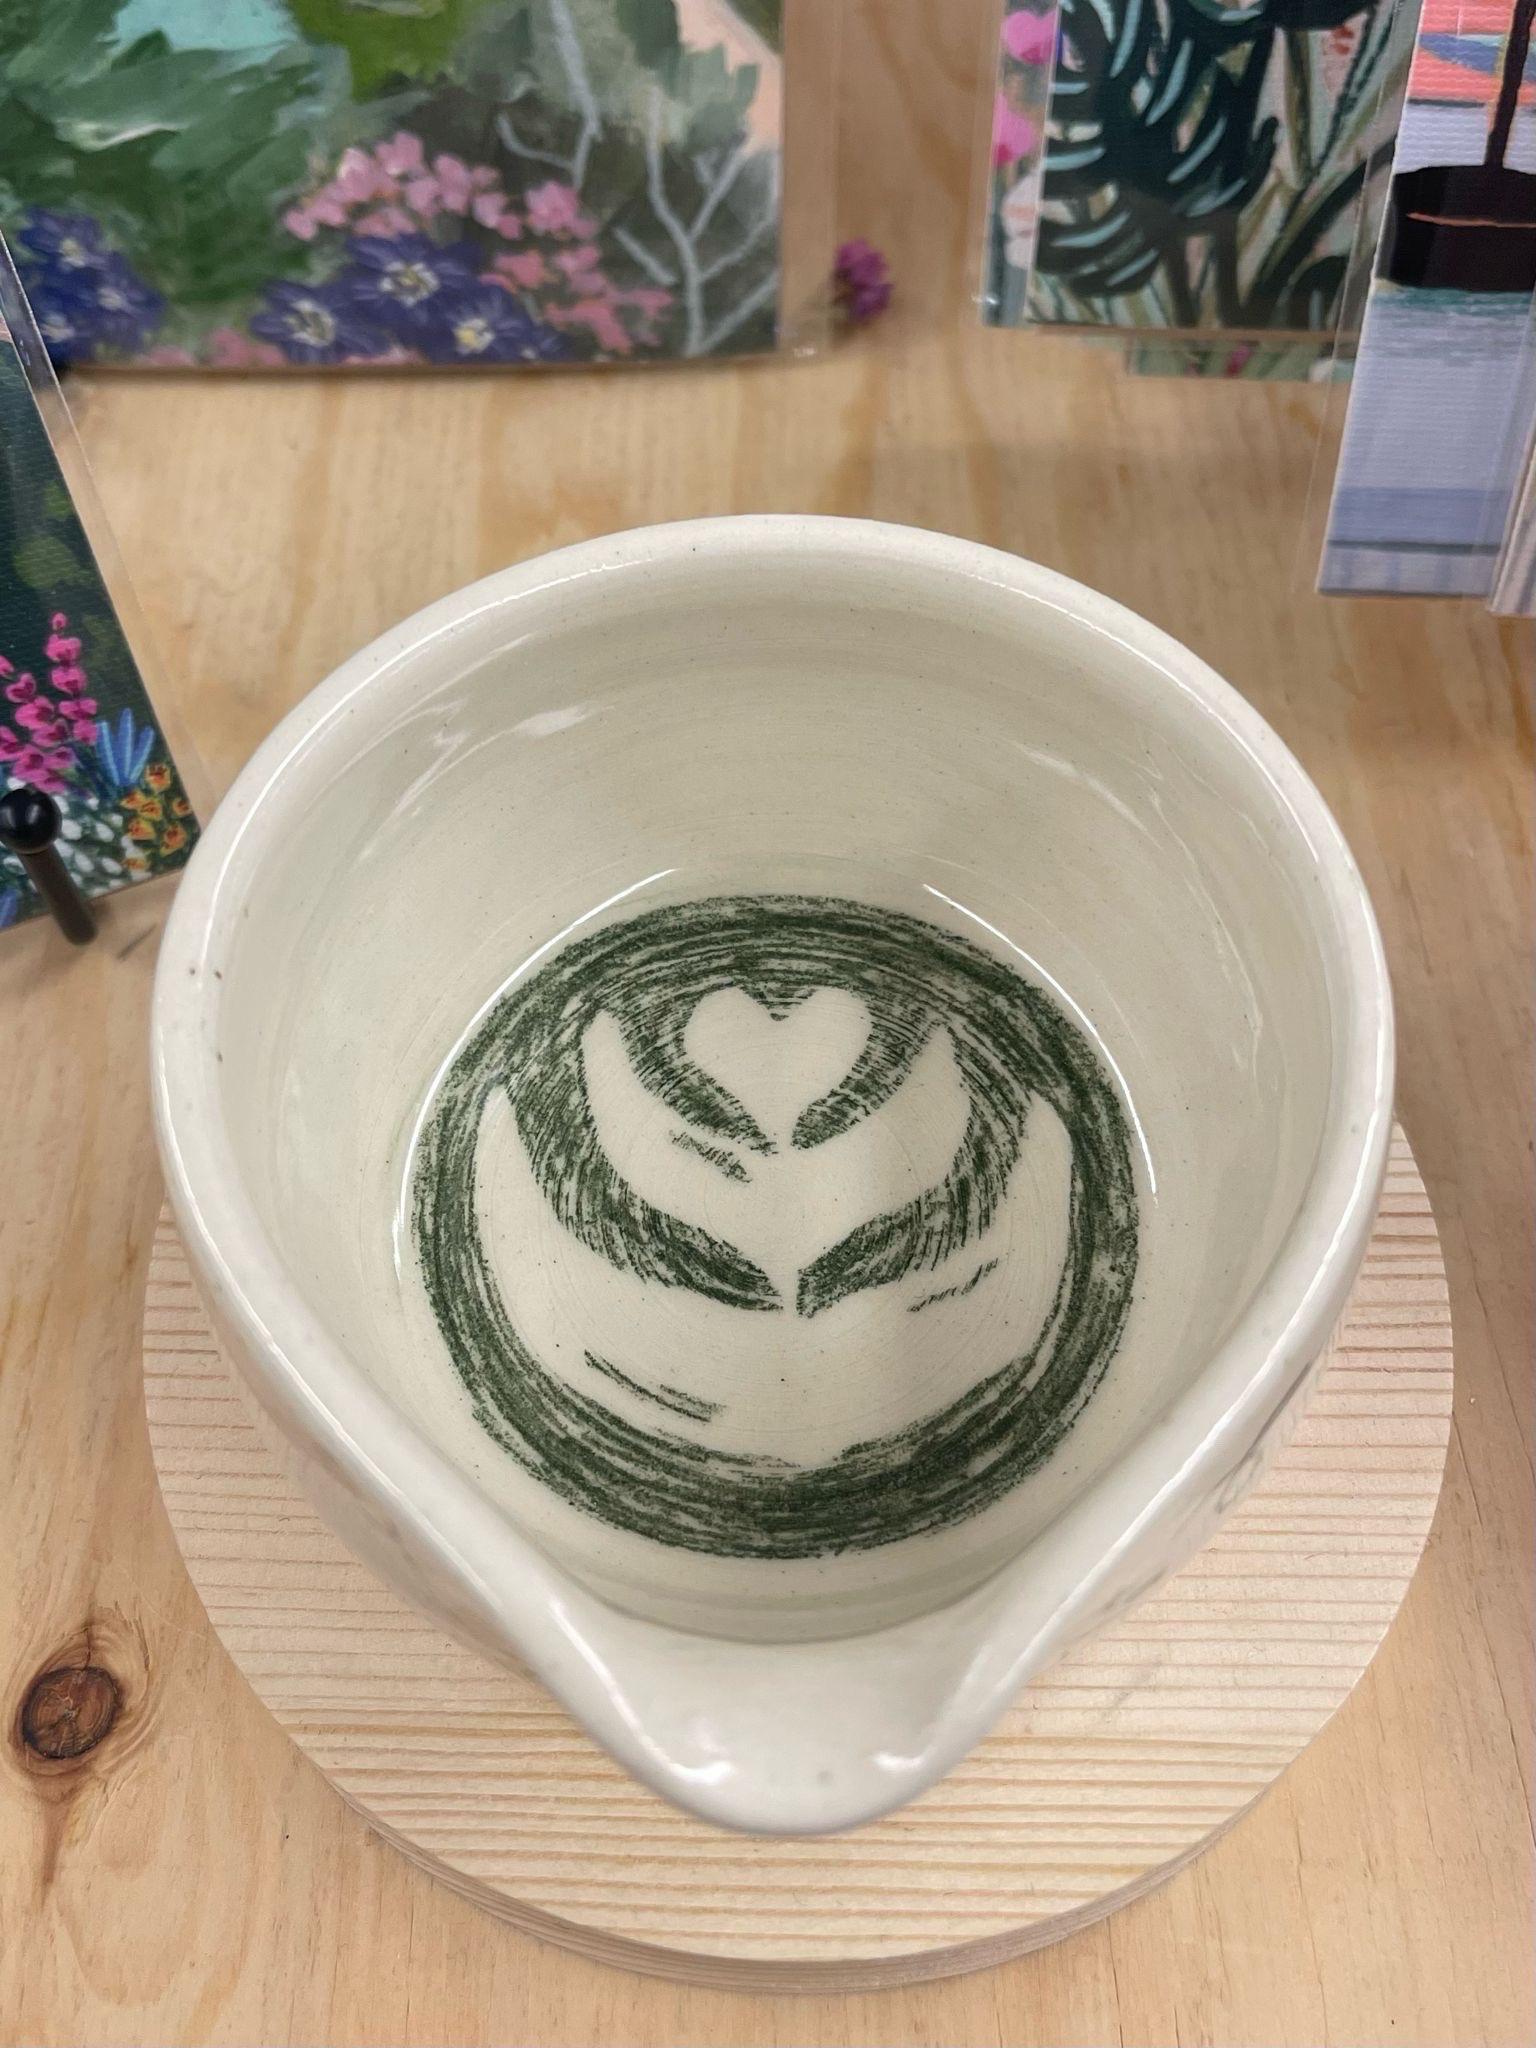 This cup has adorable doodles wrapped around the sides with handwritten “ more matcha please “. This cup has a spout for easily pouring matcha. Makers mark on the bottom. Little Okie studios is a Seattle based company specializing in Kawaii inspired